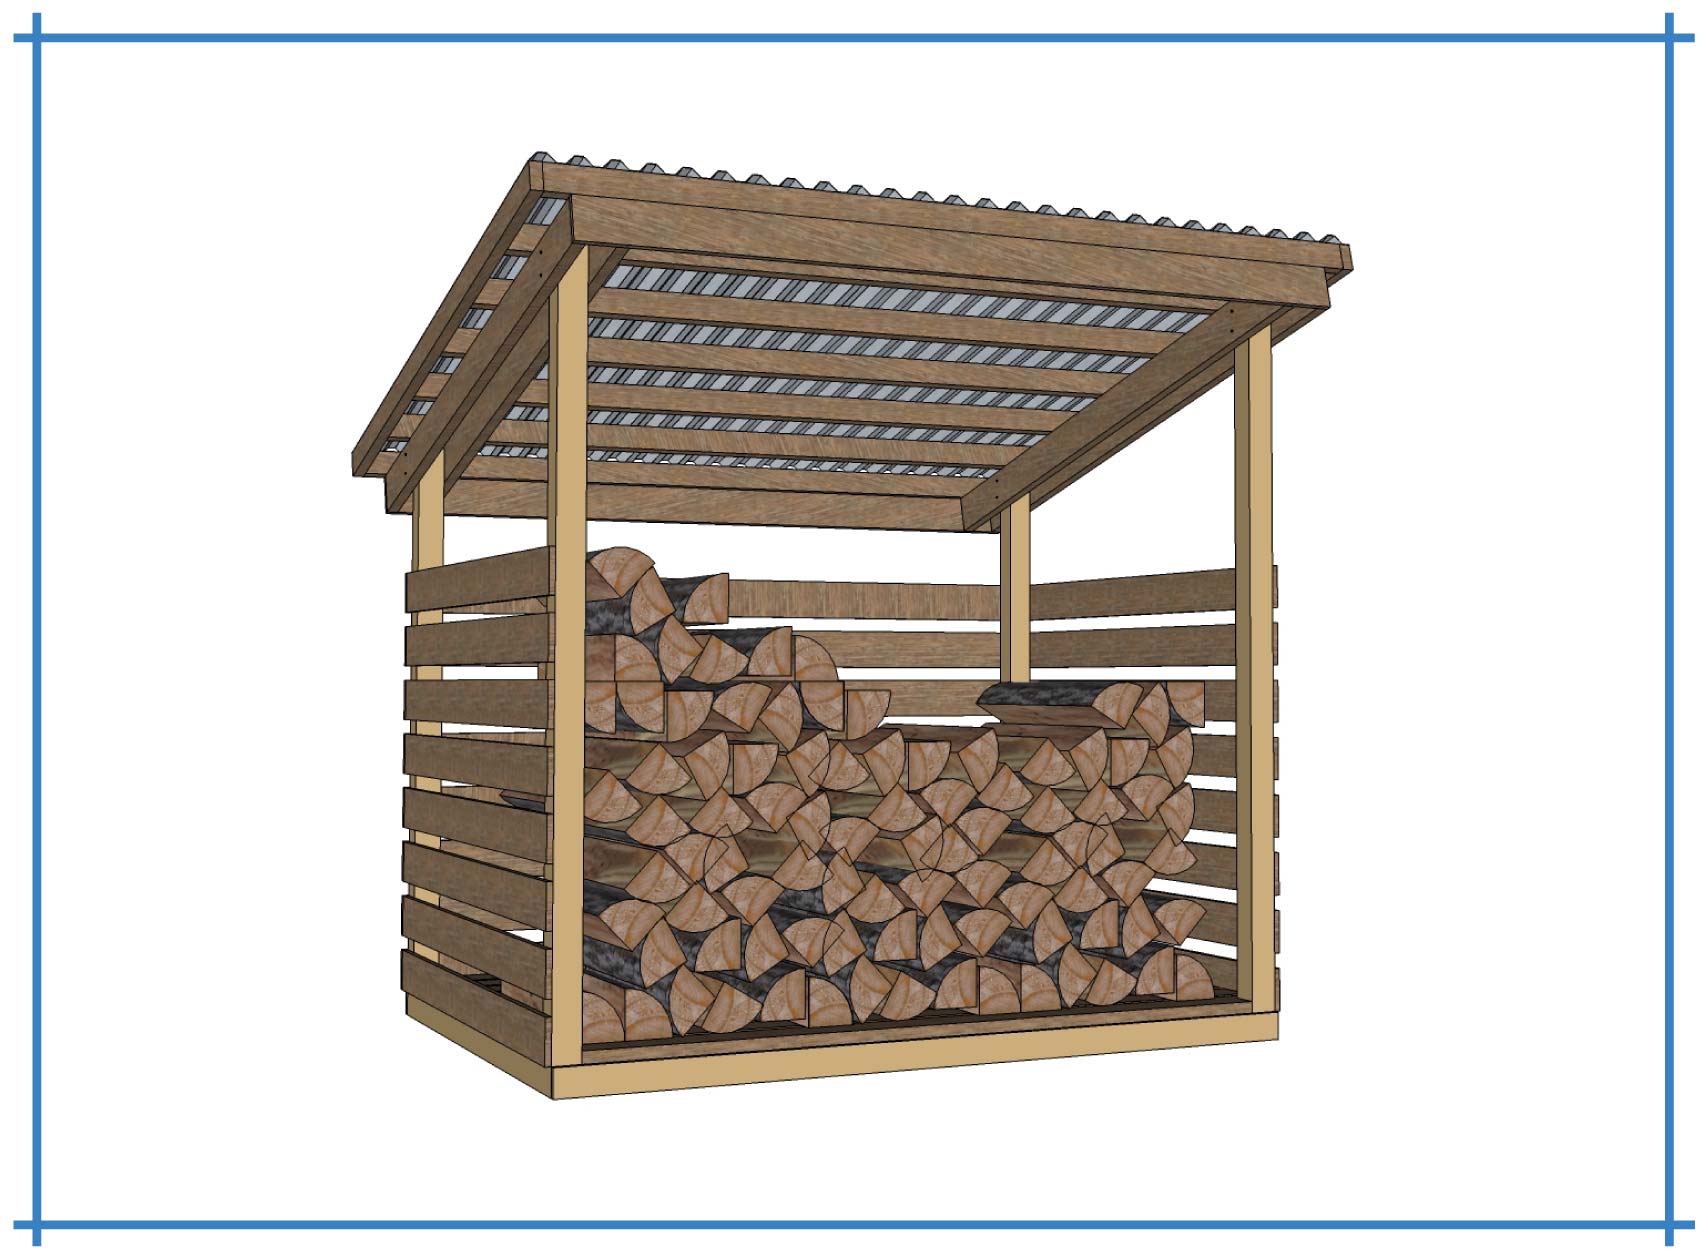 2 cord wood shed plans